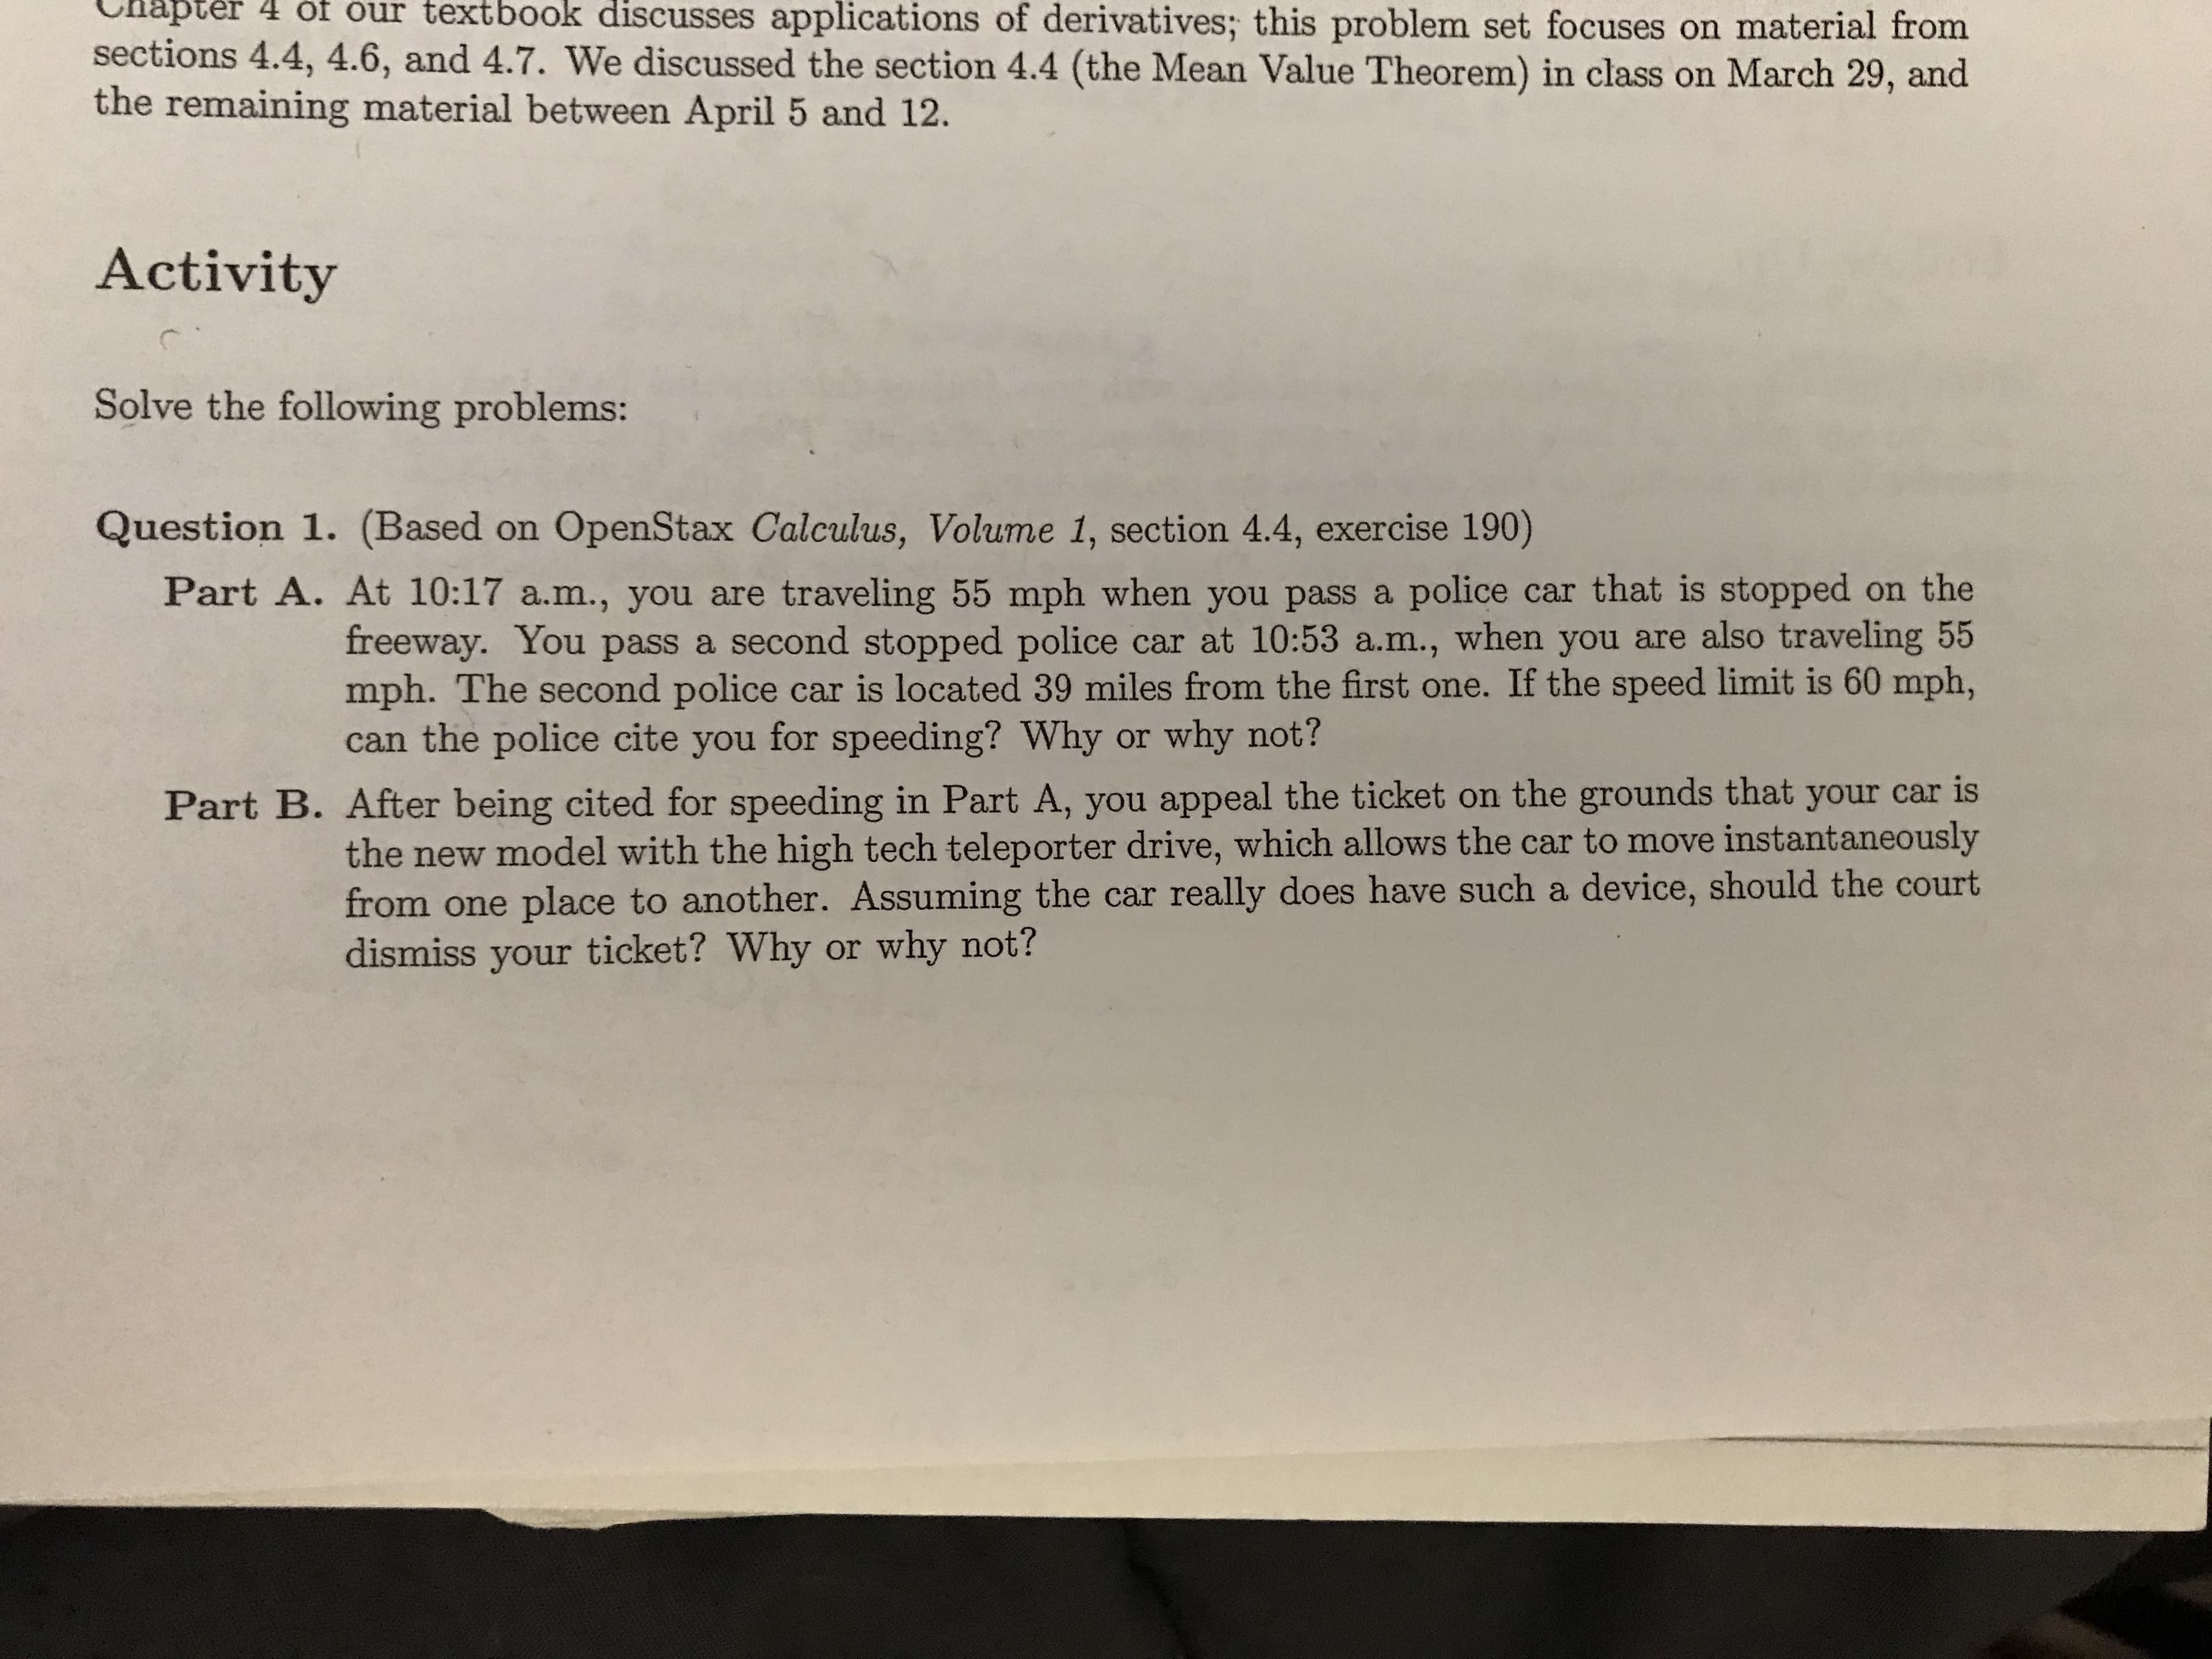 Chapter
textbook
of derivatives; this problem set focuses on material from
4
ot our
discusses
applications
sections 4.4, 4.6, and 4.7. We discussed the section 4.4 (the Mean Value Theorem) in class on March 29, and
the remaining material between April 5 and 12.
Activity
Solve the following problems:
Question 1. (Based on OpenStax Calculus, Volume 1, section 4.4, exercise 190)
Part A. At 10:17 a.m., you are traveling 55 mph when you pass a police car that is stopped on the
freeway. You pass a second stopped police car at 10:53 a.m., when you are also traveling 55
mph. The second police car is located 39 miles from the first one. If the speed limit is 60 mph,
can the police cite you for speeding? Why or why not?
Part B. After being cited for speeding in Part A, you appeal the ticket on the grounds that your car is
the new model with the high tech teleporter drive, which allows the car to move instantaneously
from one place to another. Assuming the car really does have such a device, should the court
dismiss your ticket? Why or why not?
